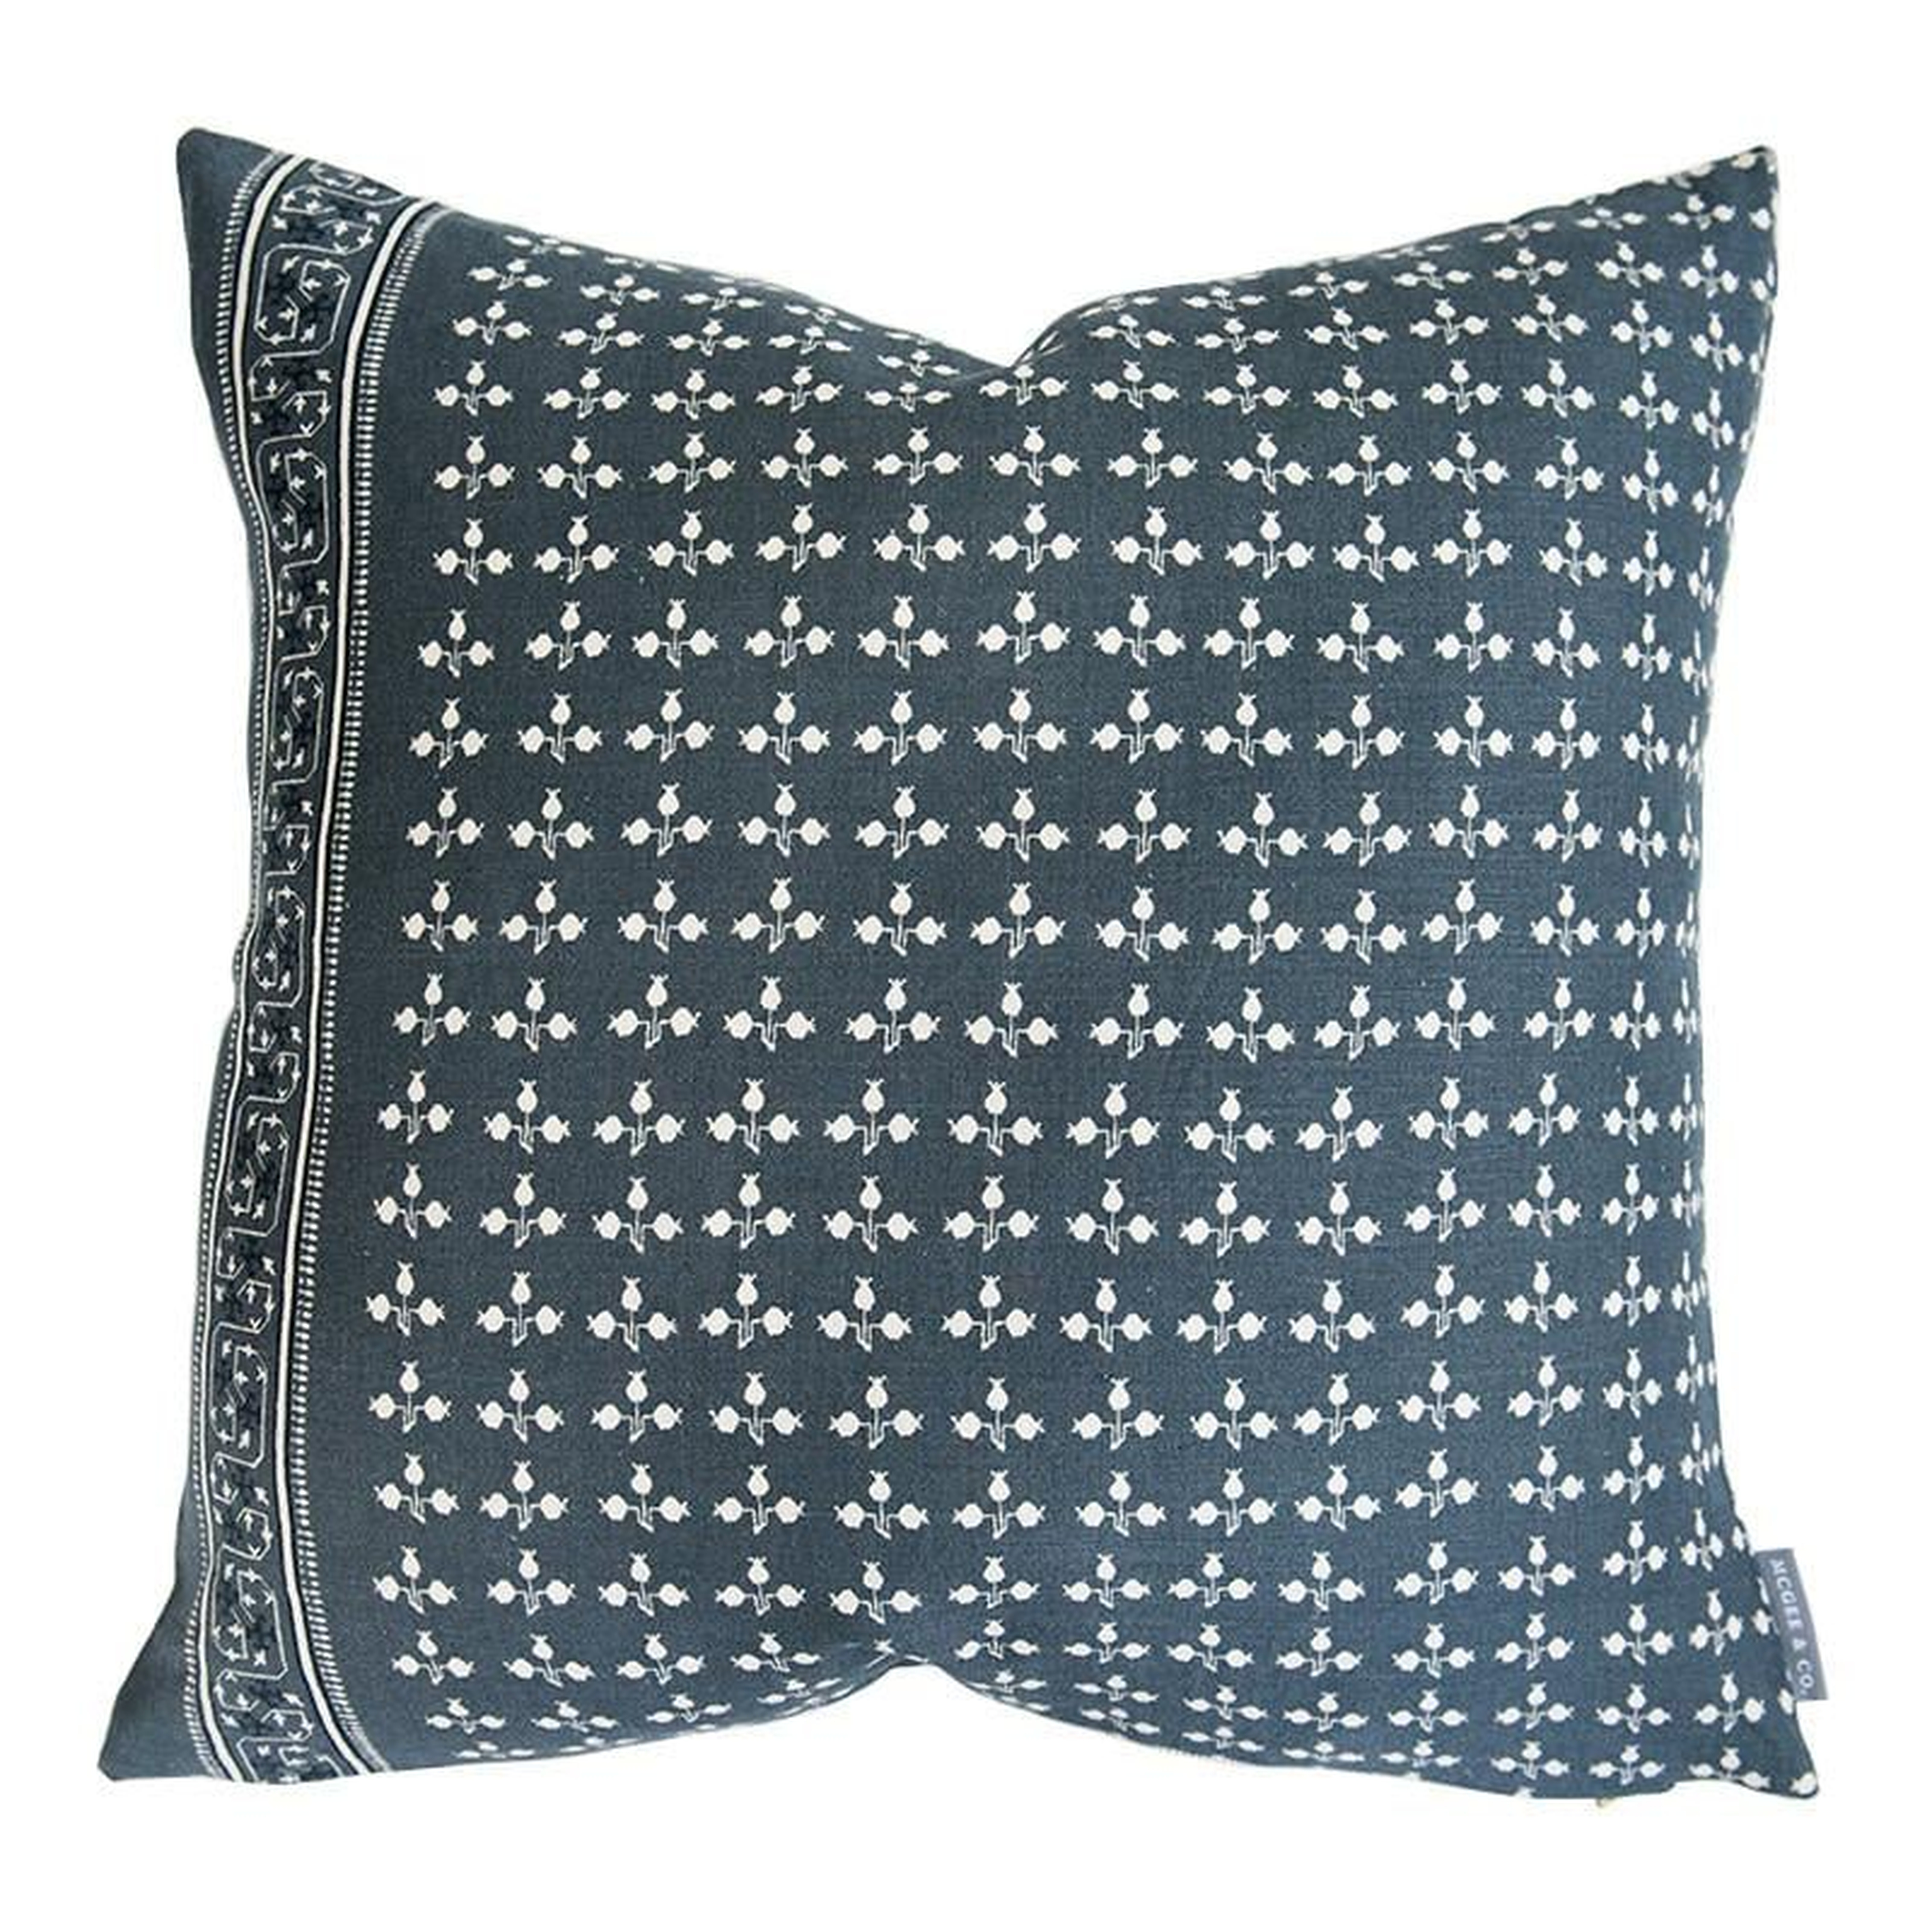 SAWYER PILLOW WITHOUT INSERT, 20" x 20" - McGee & Co.